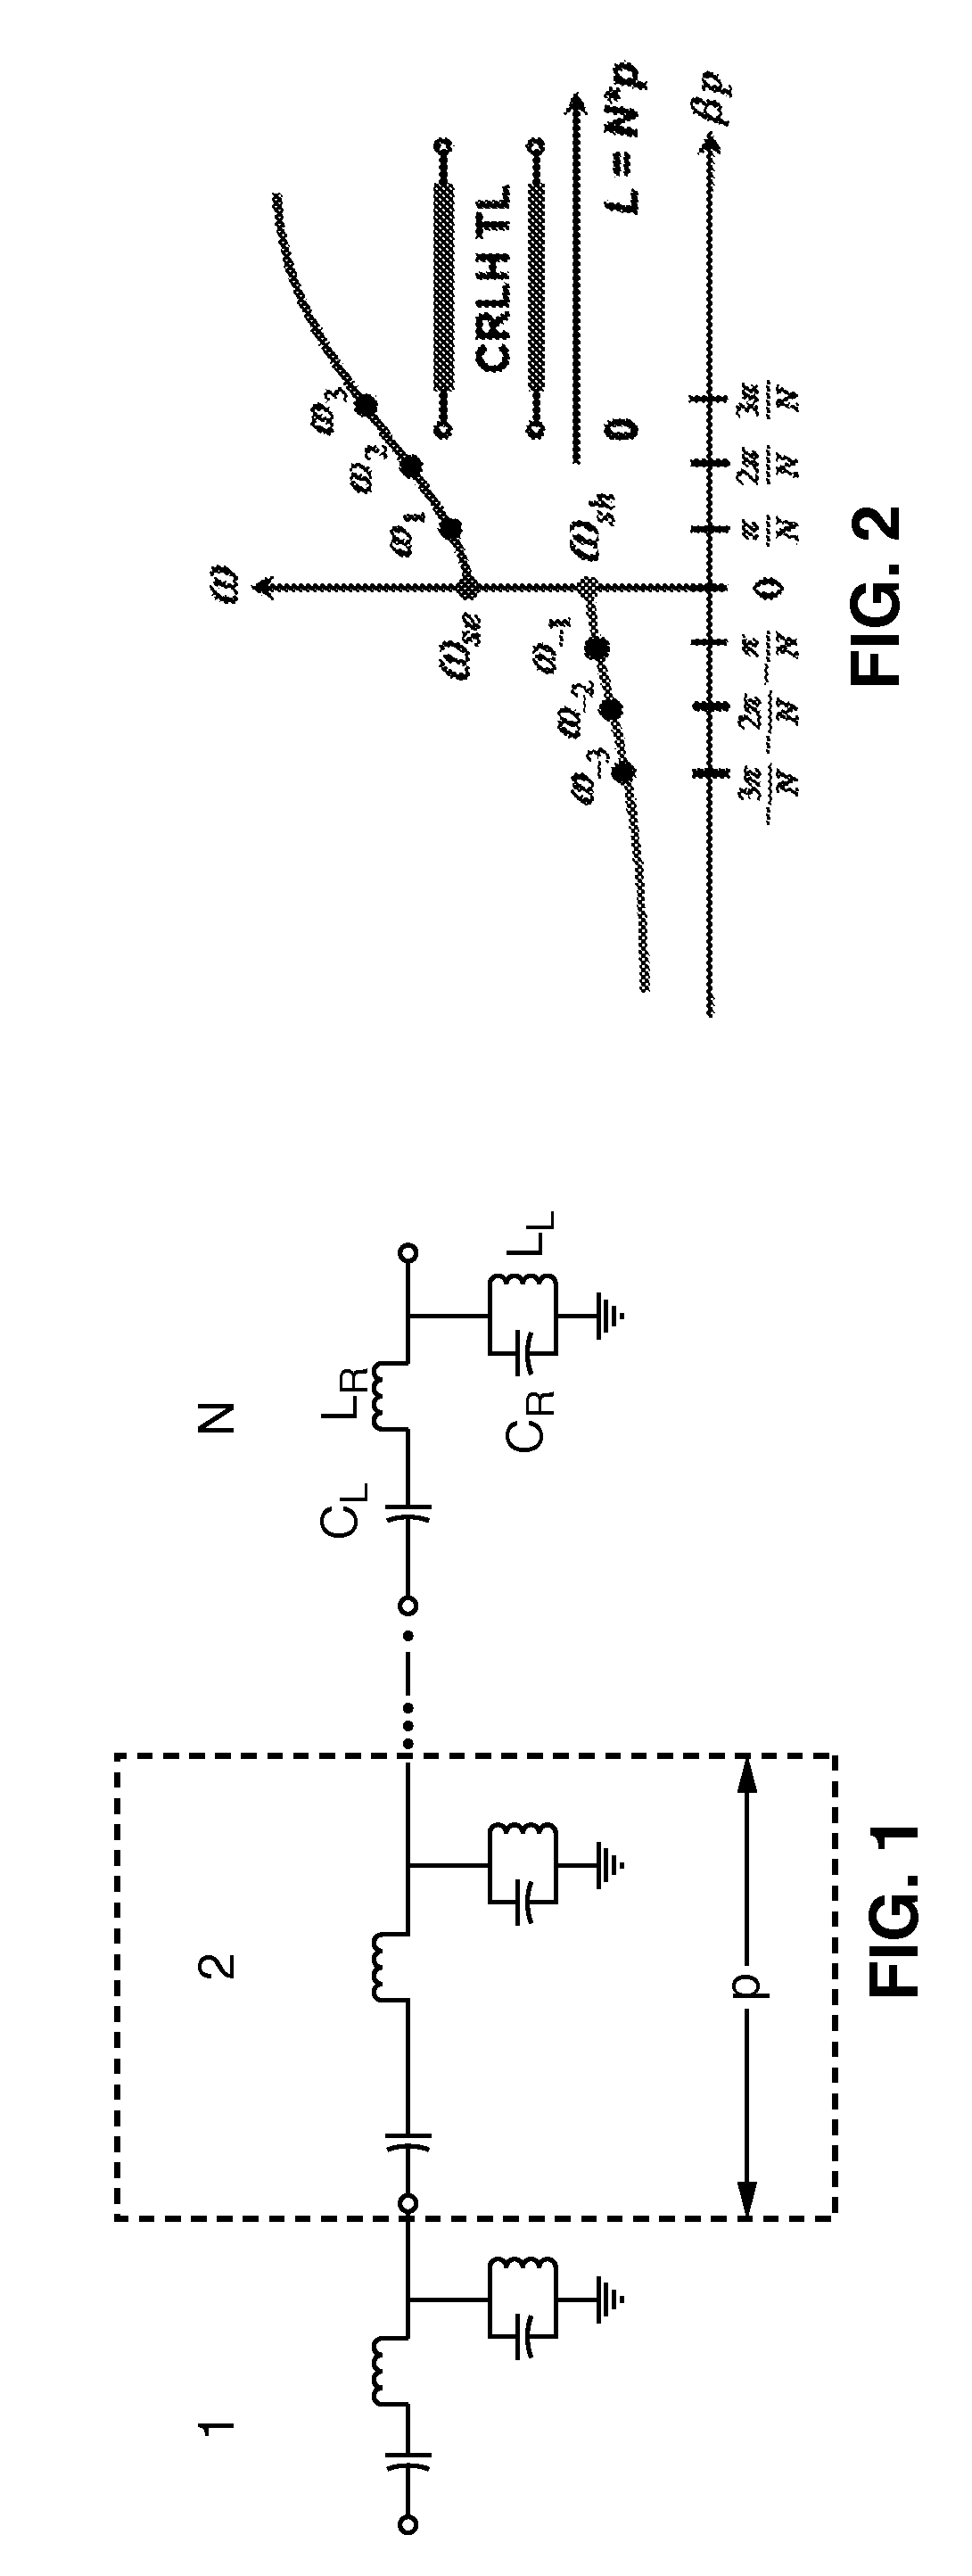 Multi-band radiating elements with composite right/left-handed meta-material transmission line